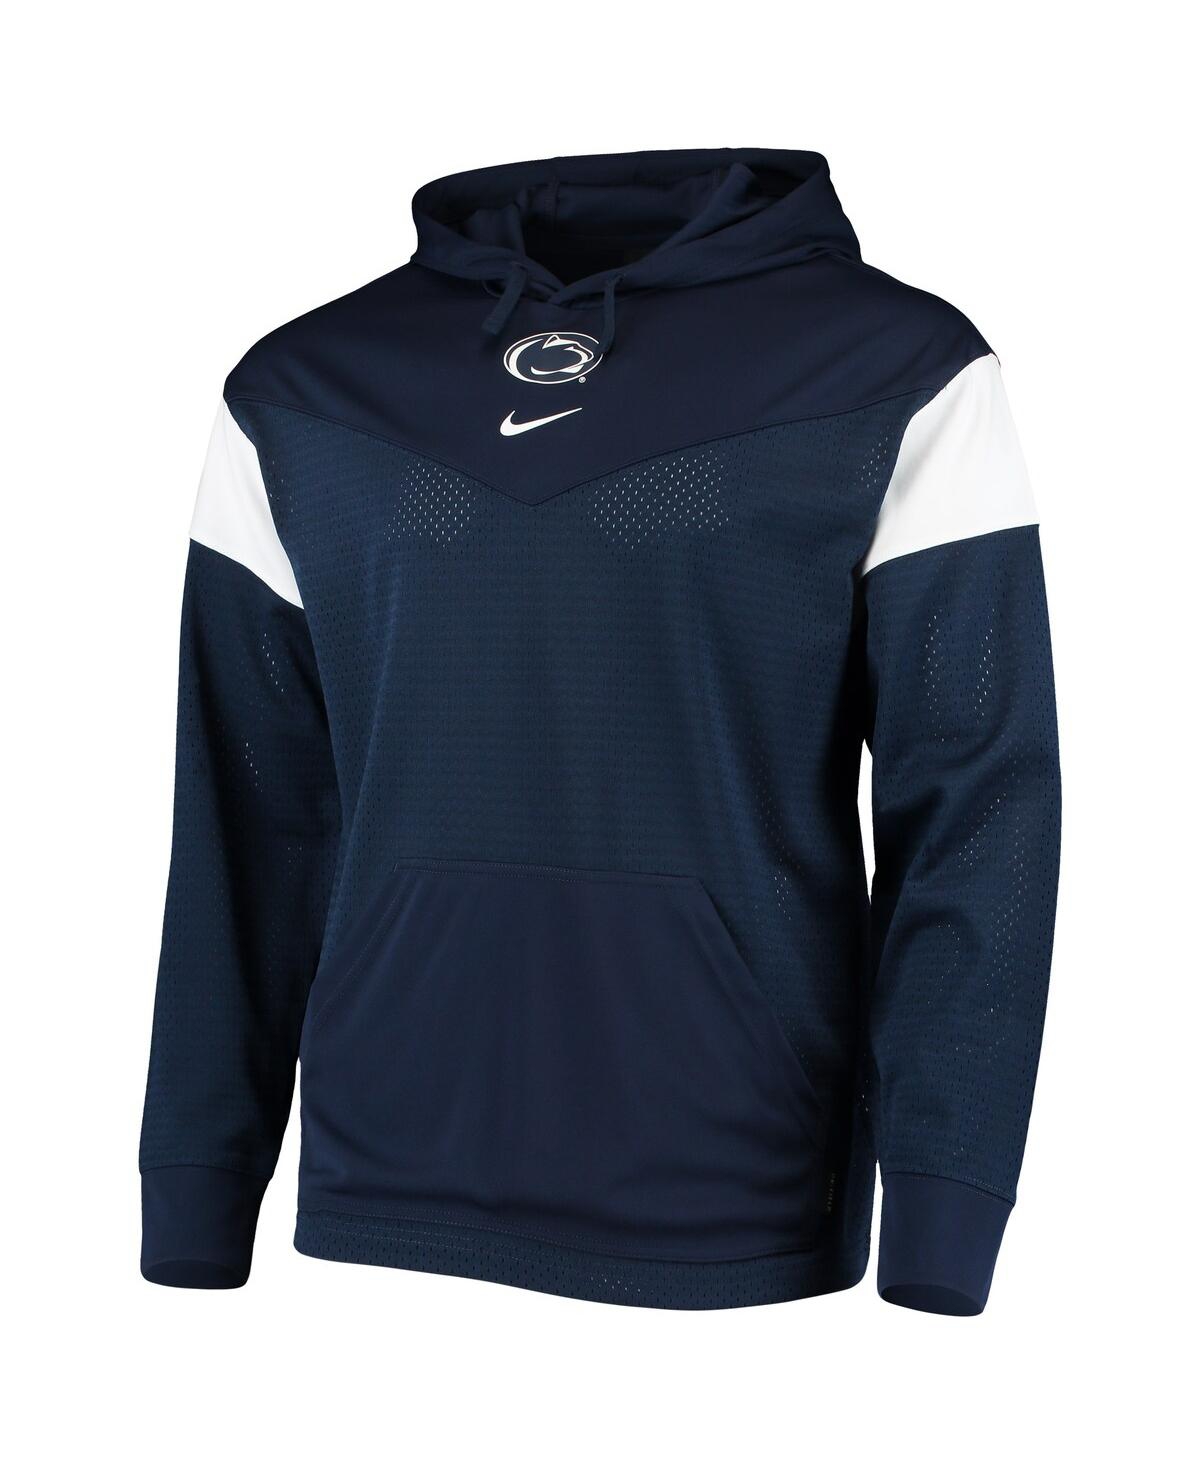 Shop Nike Men's Navy Penn State Nittany Lions Sideline Jersey Pullover Hoodie